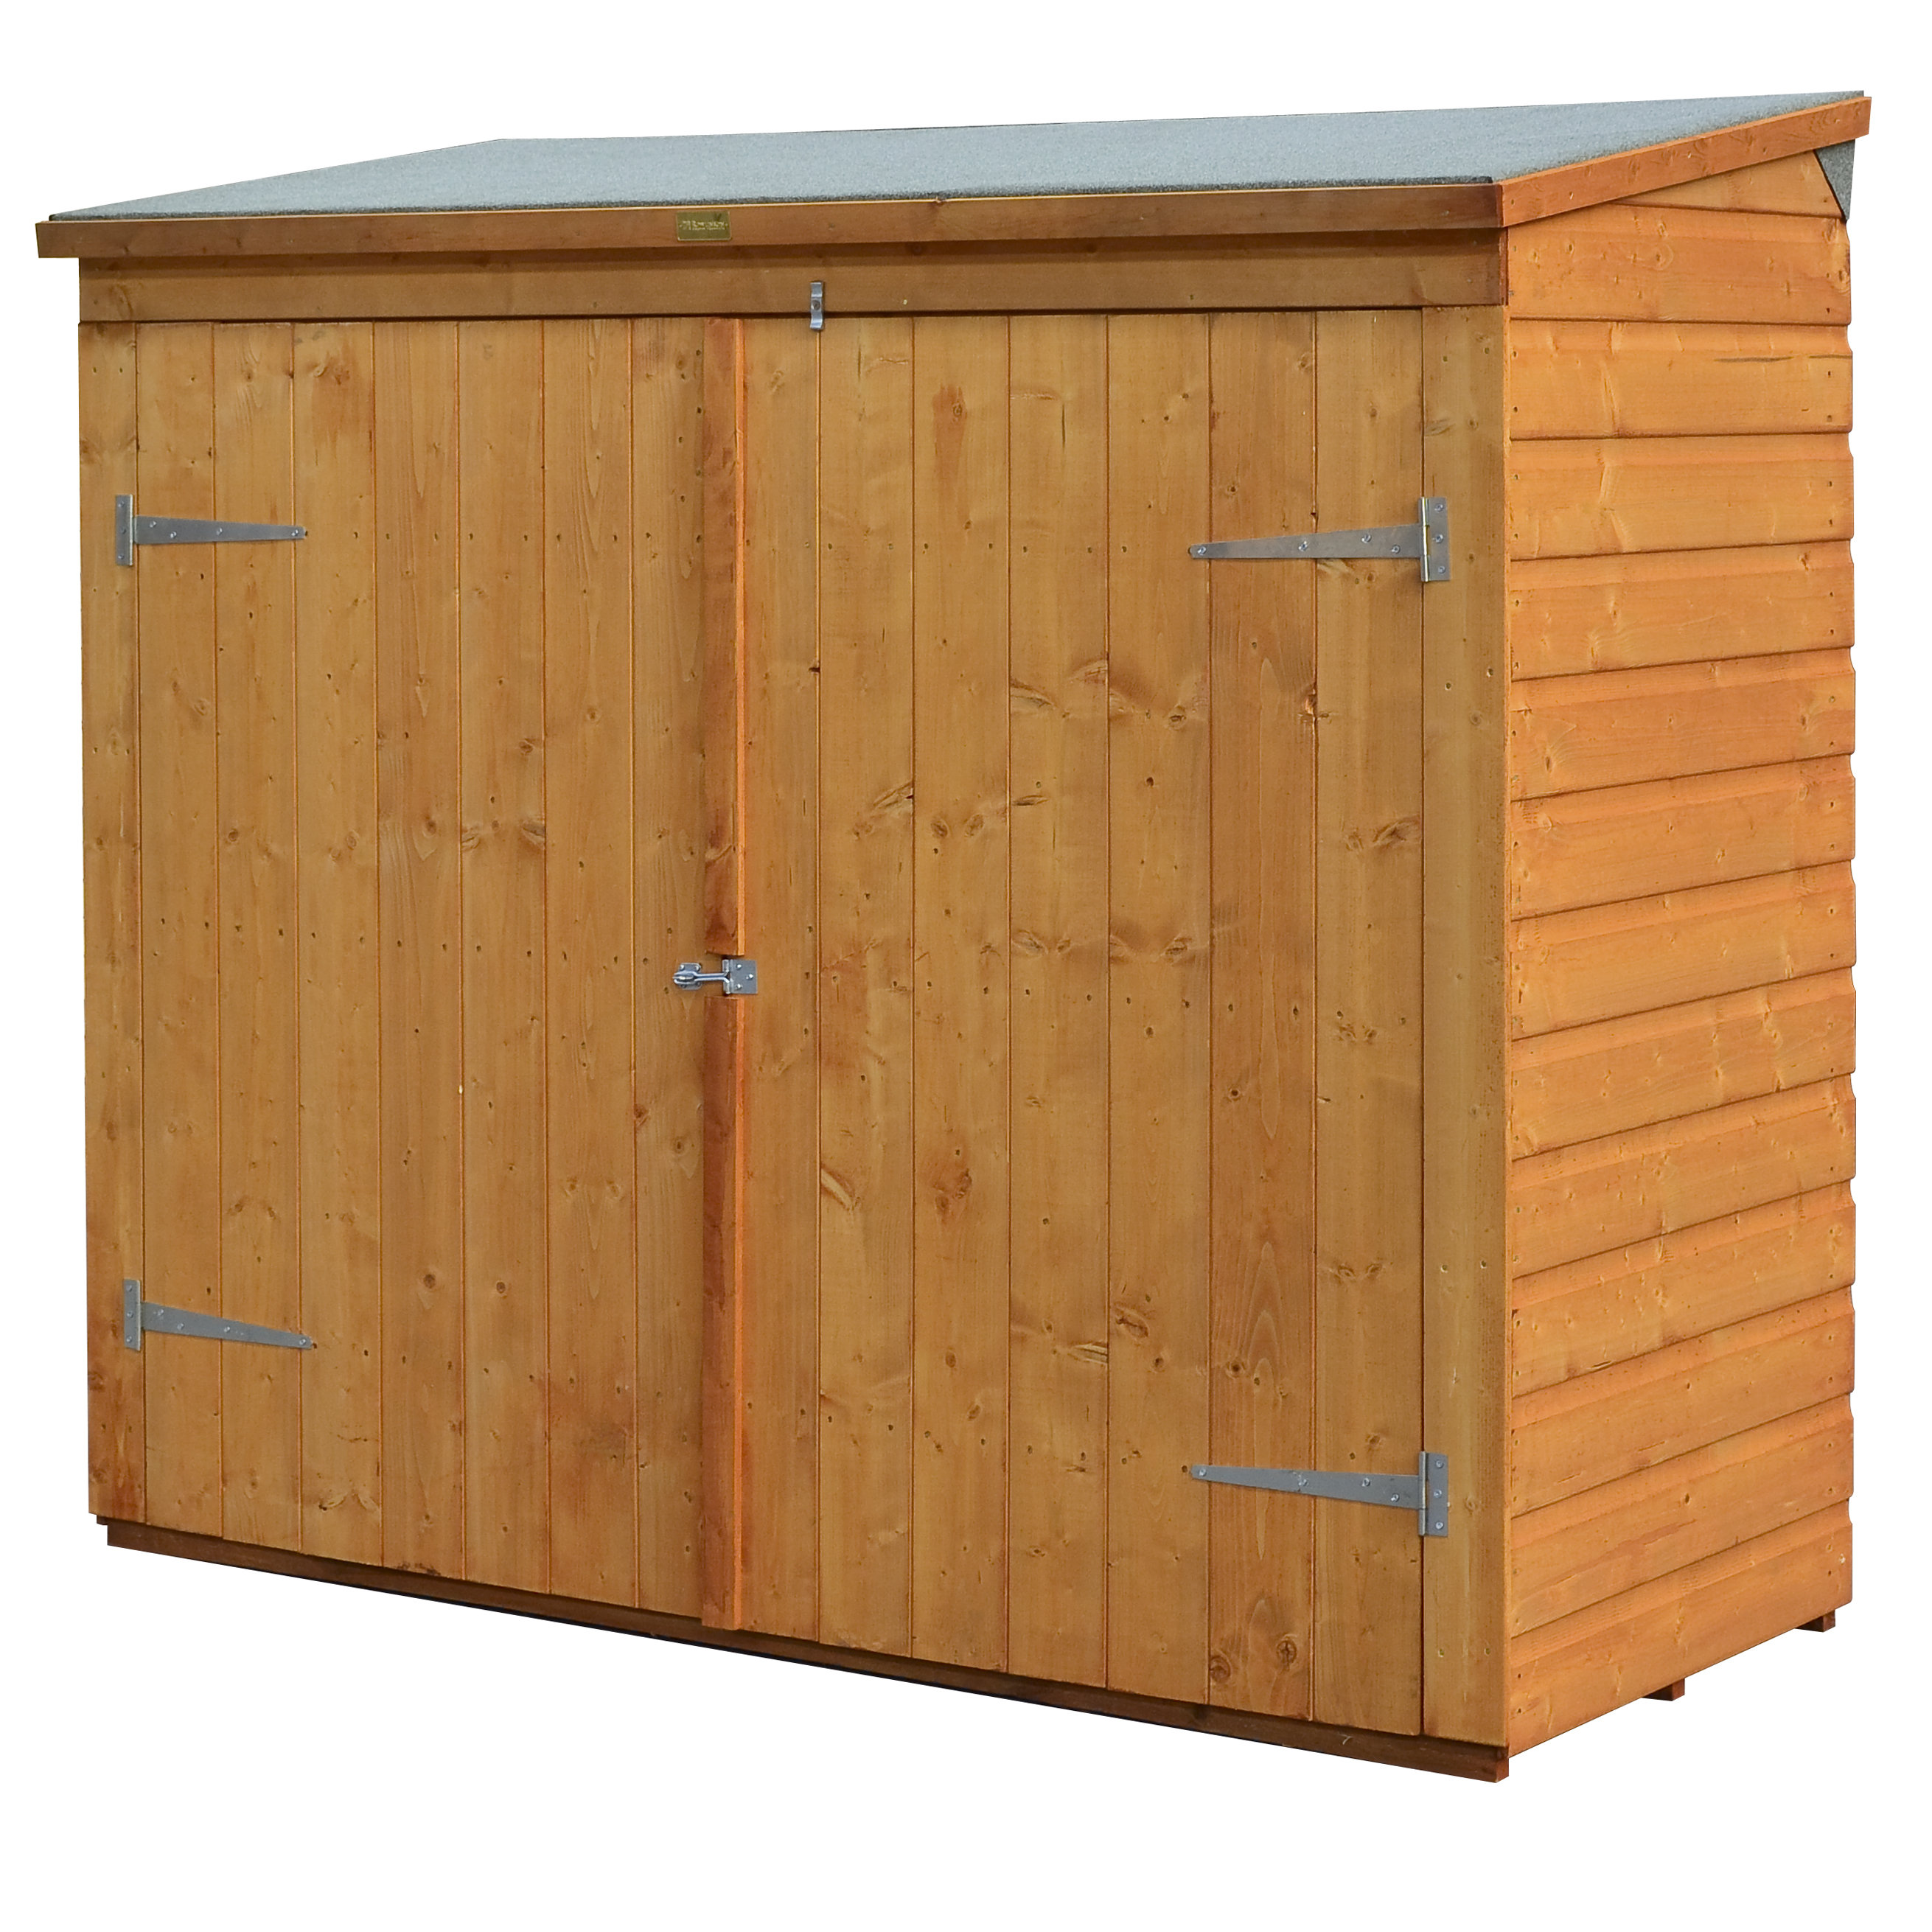 6ft x 5ft Wooden Shed Pro